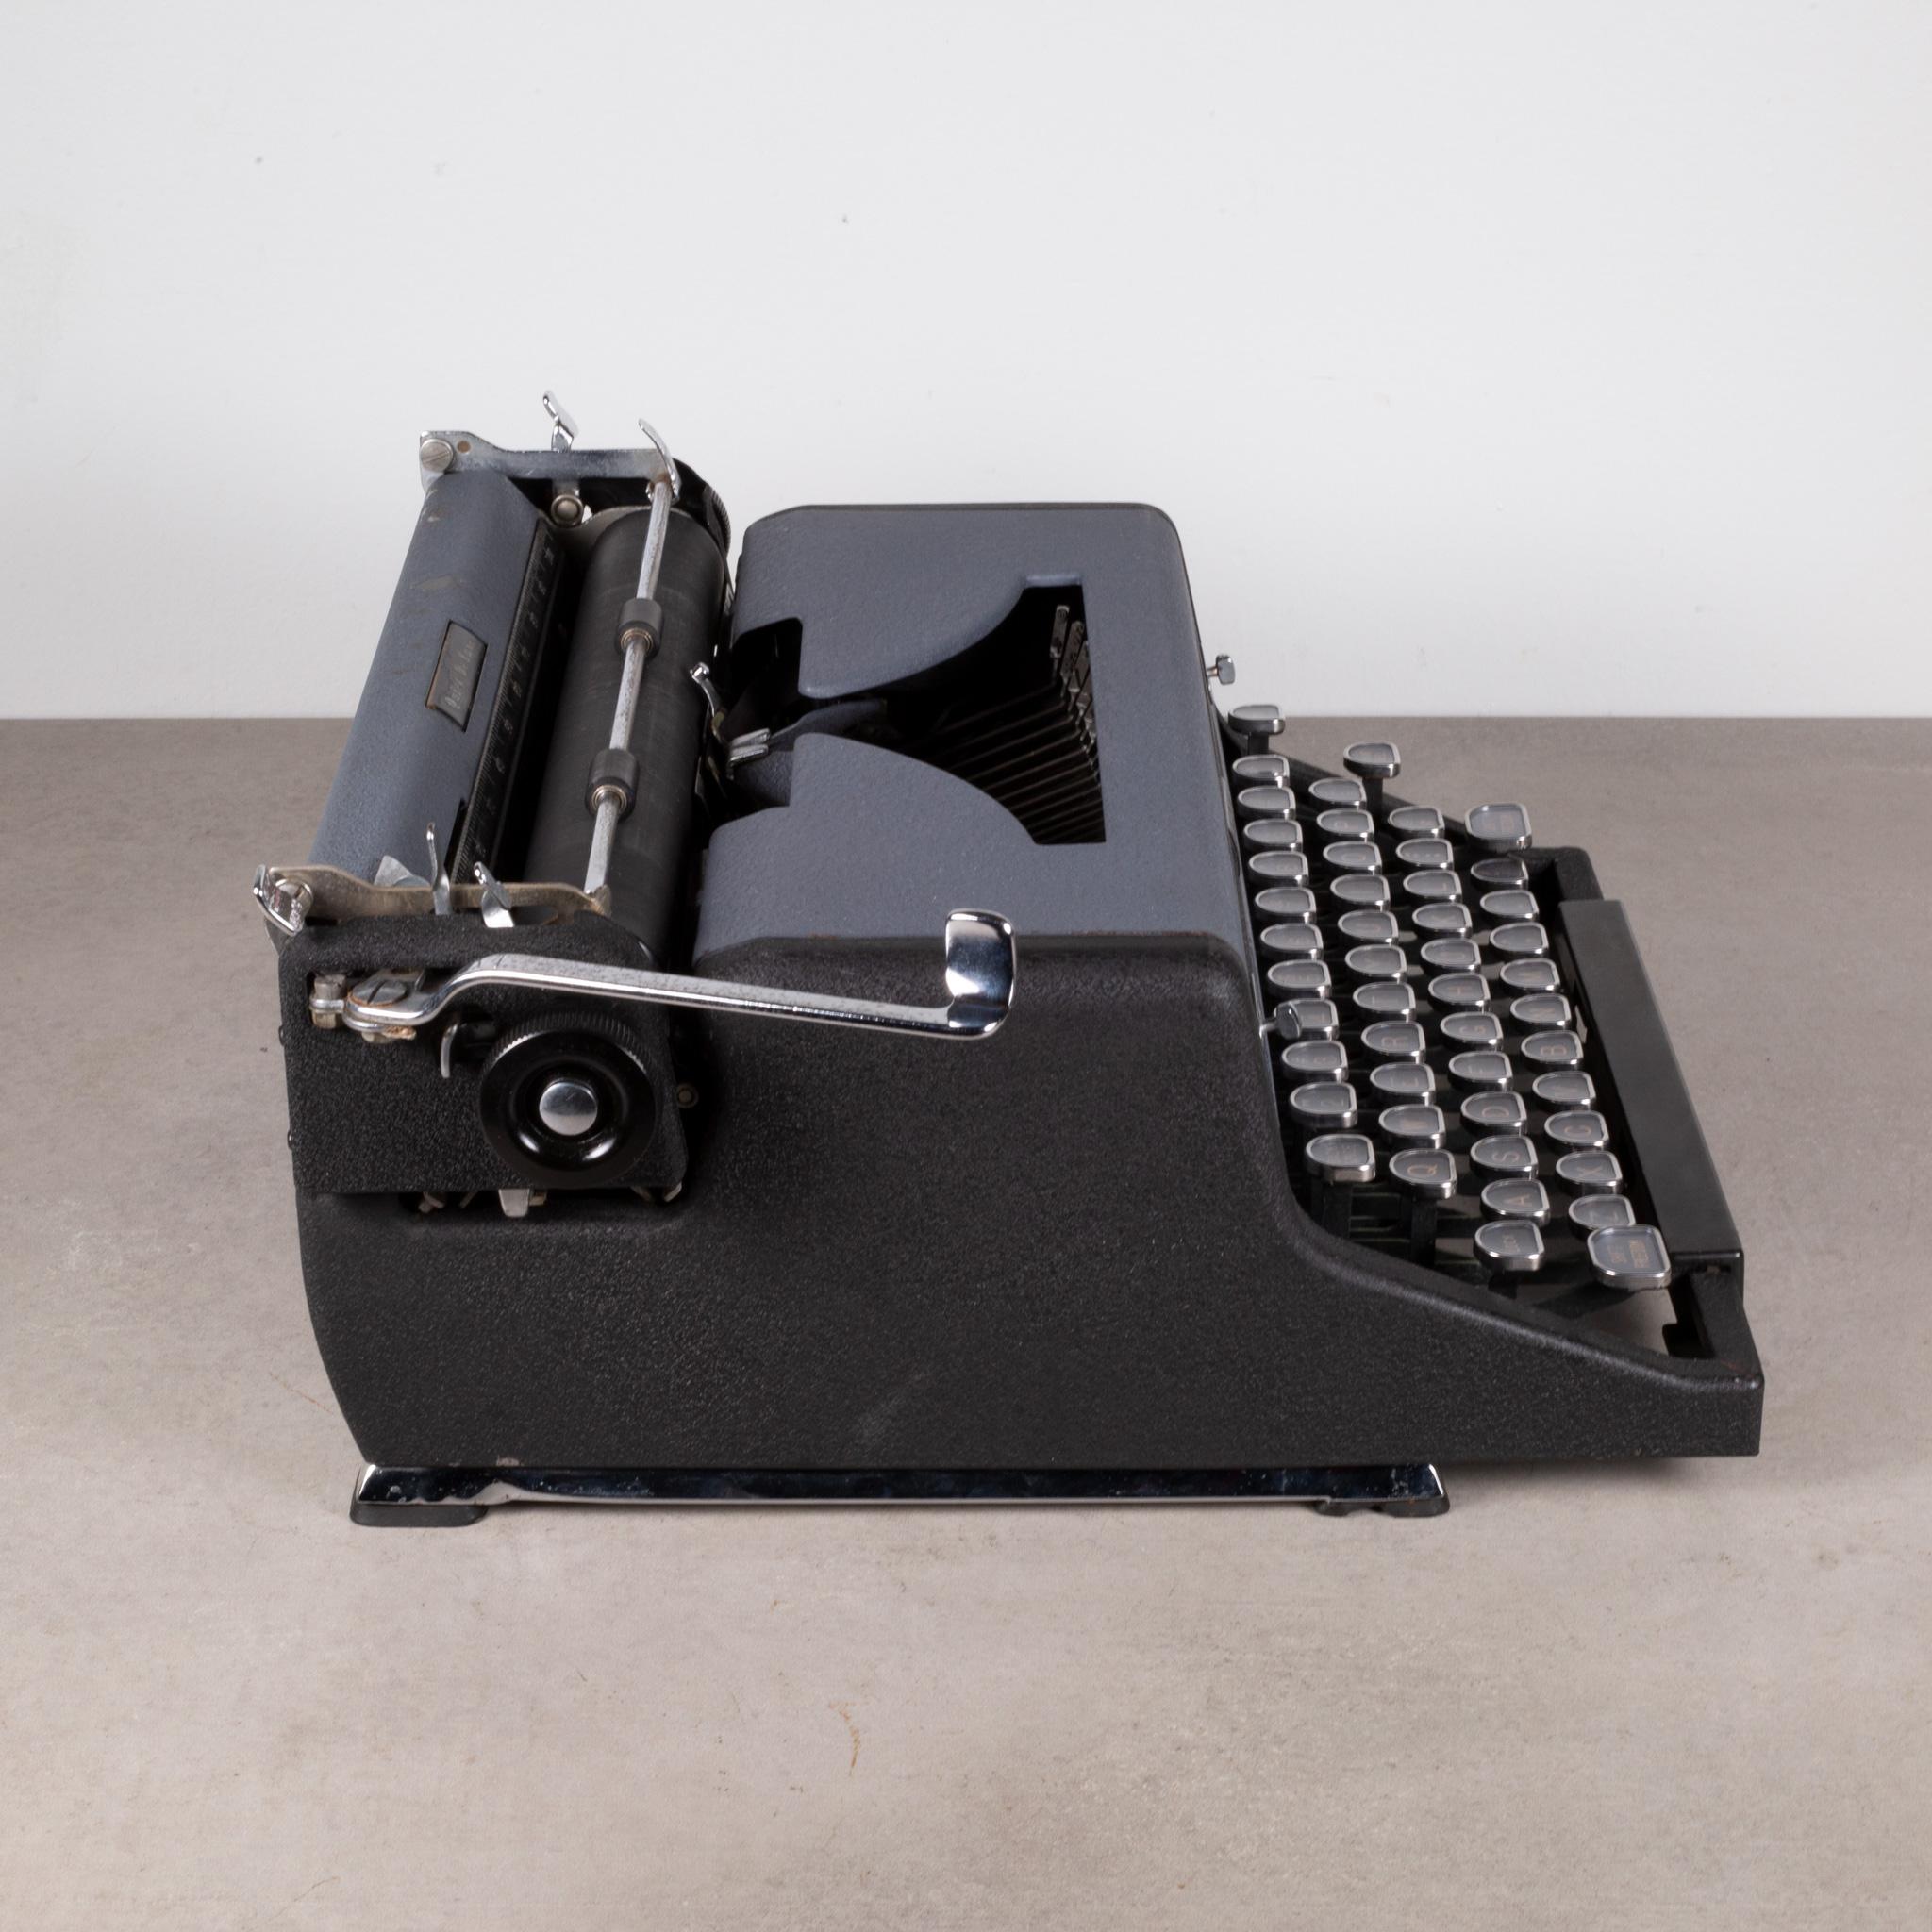 Royal Quiet DeLuxe Two Tone Typewriter and Case, c.1948  (FREE SHIPPING) In Good Condition For Sale In San Francisco, CA